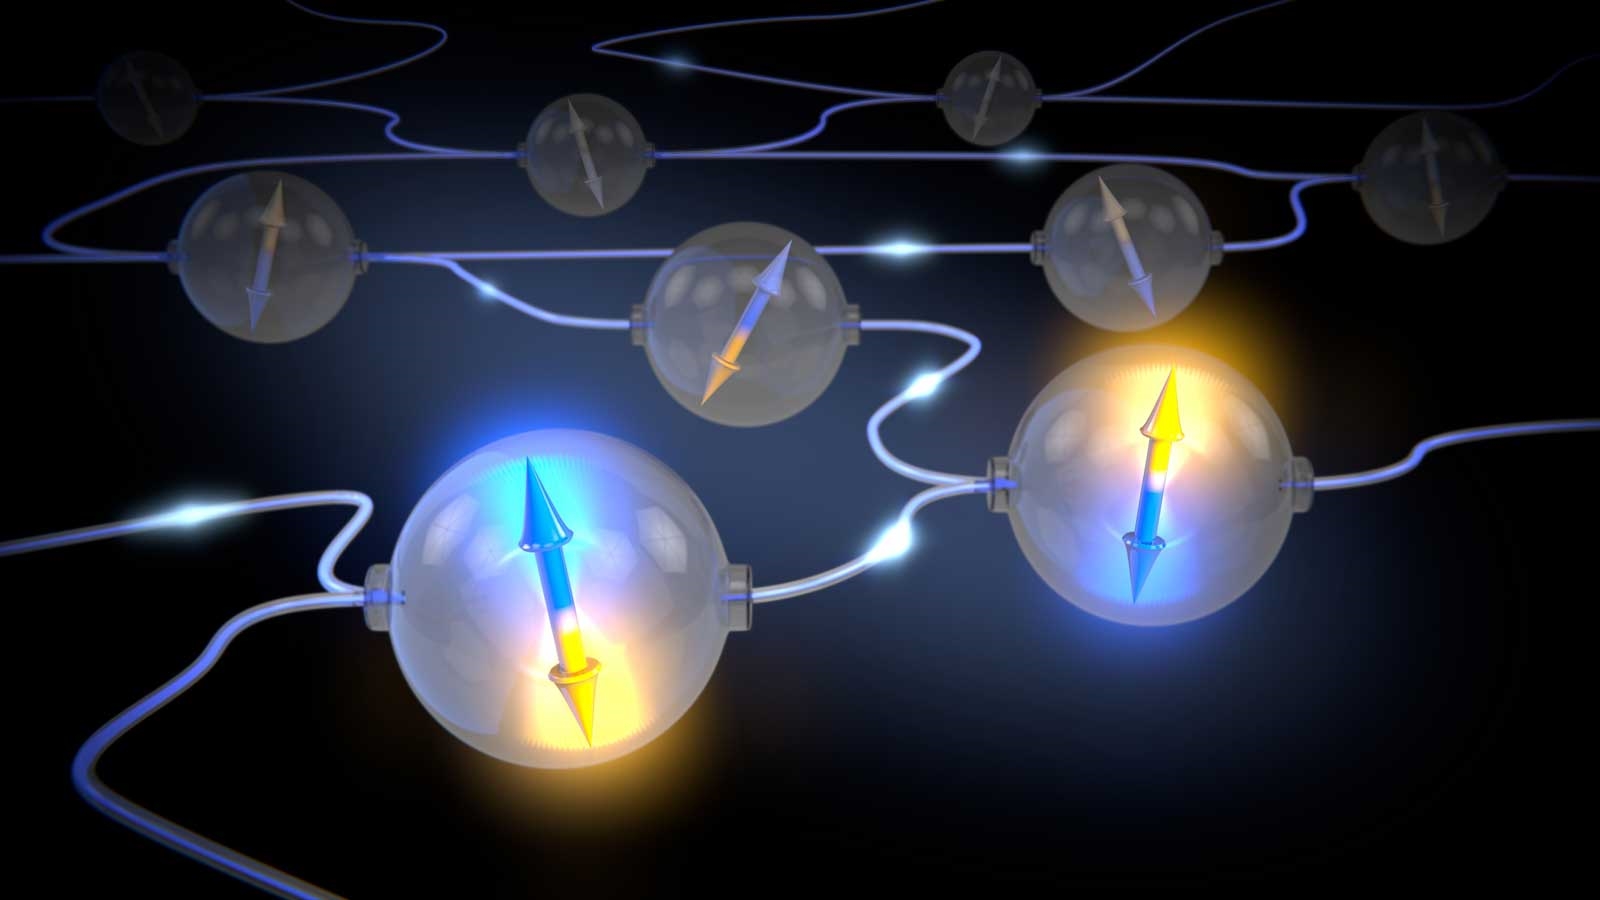 Quantum entanglement on demand could lead to a super-secure internet | DeviceDaily.com